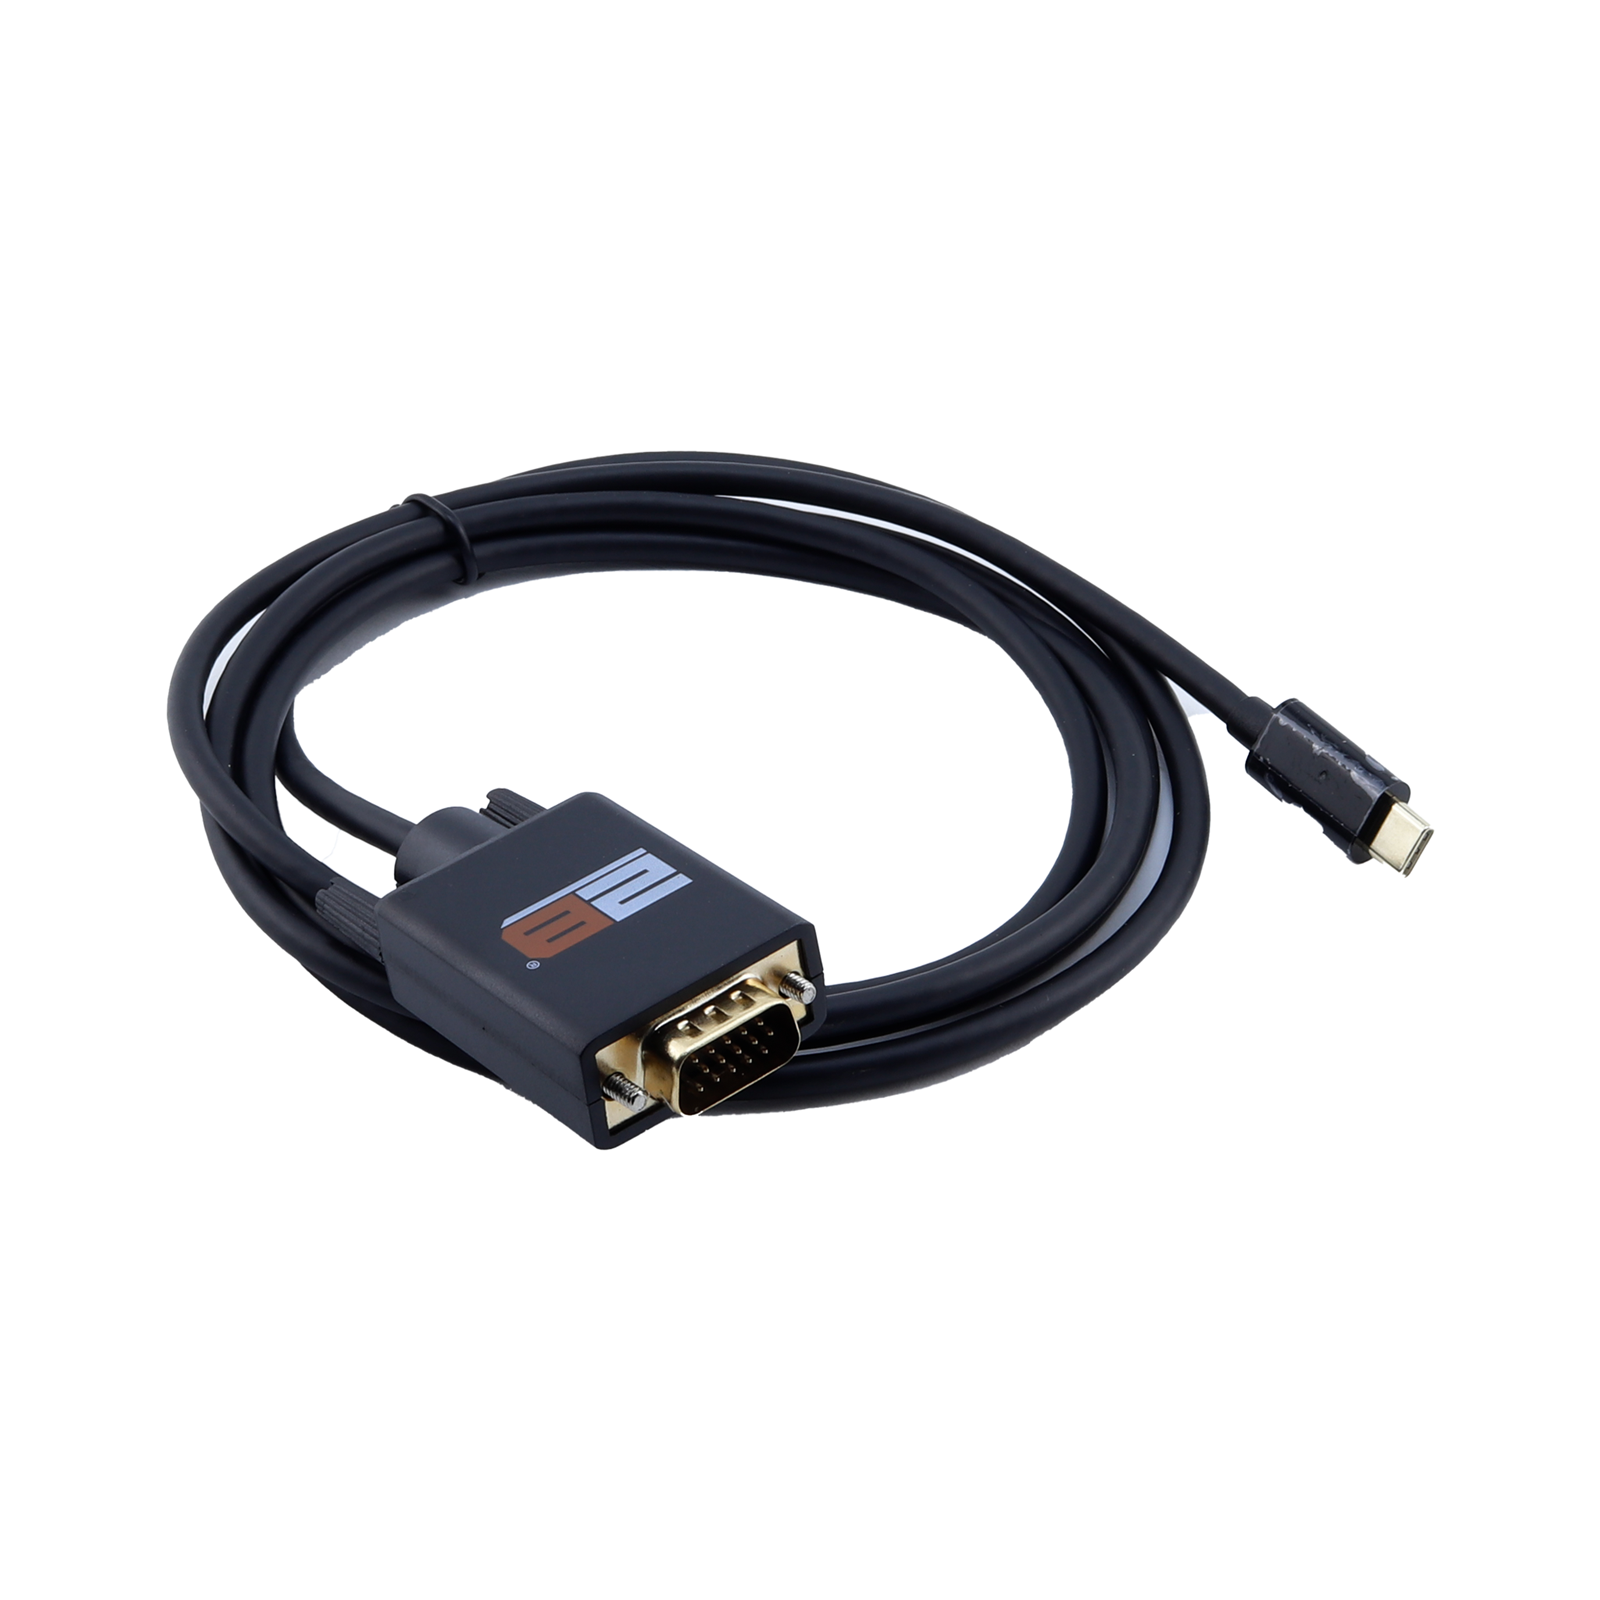 Type C To VGA Cable 1.8M 2B CV144